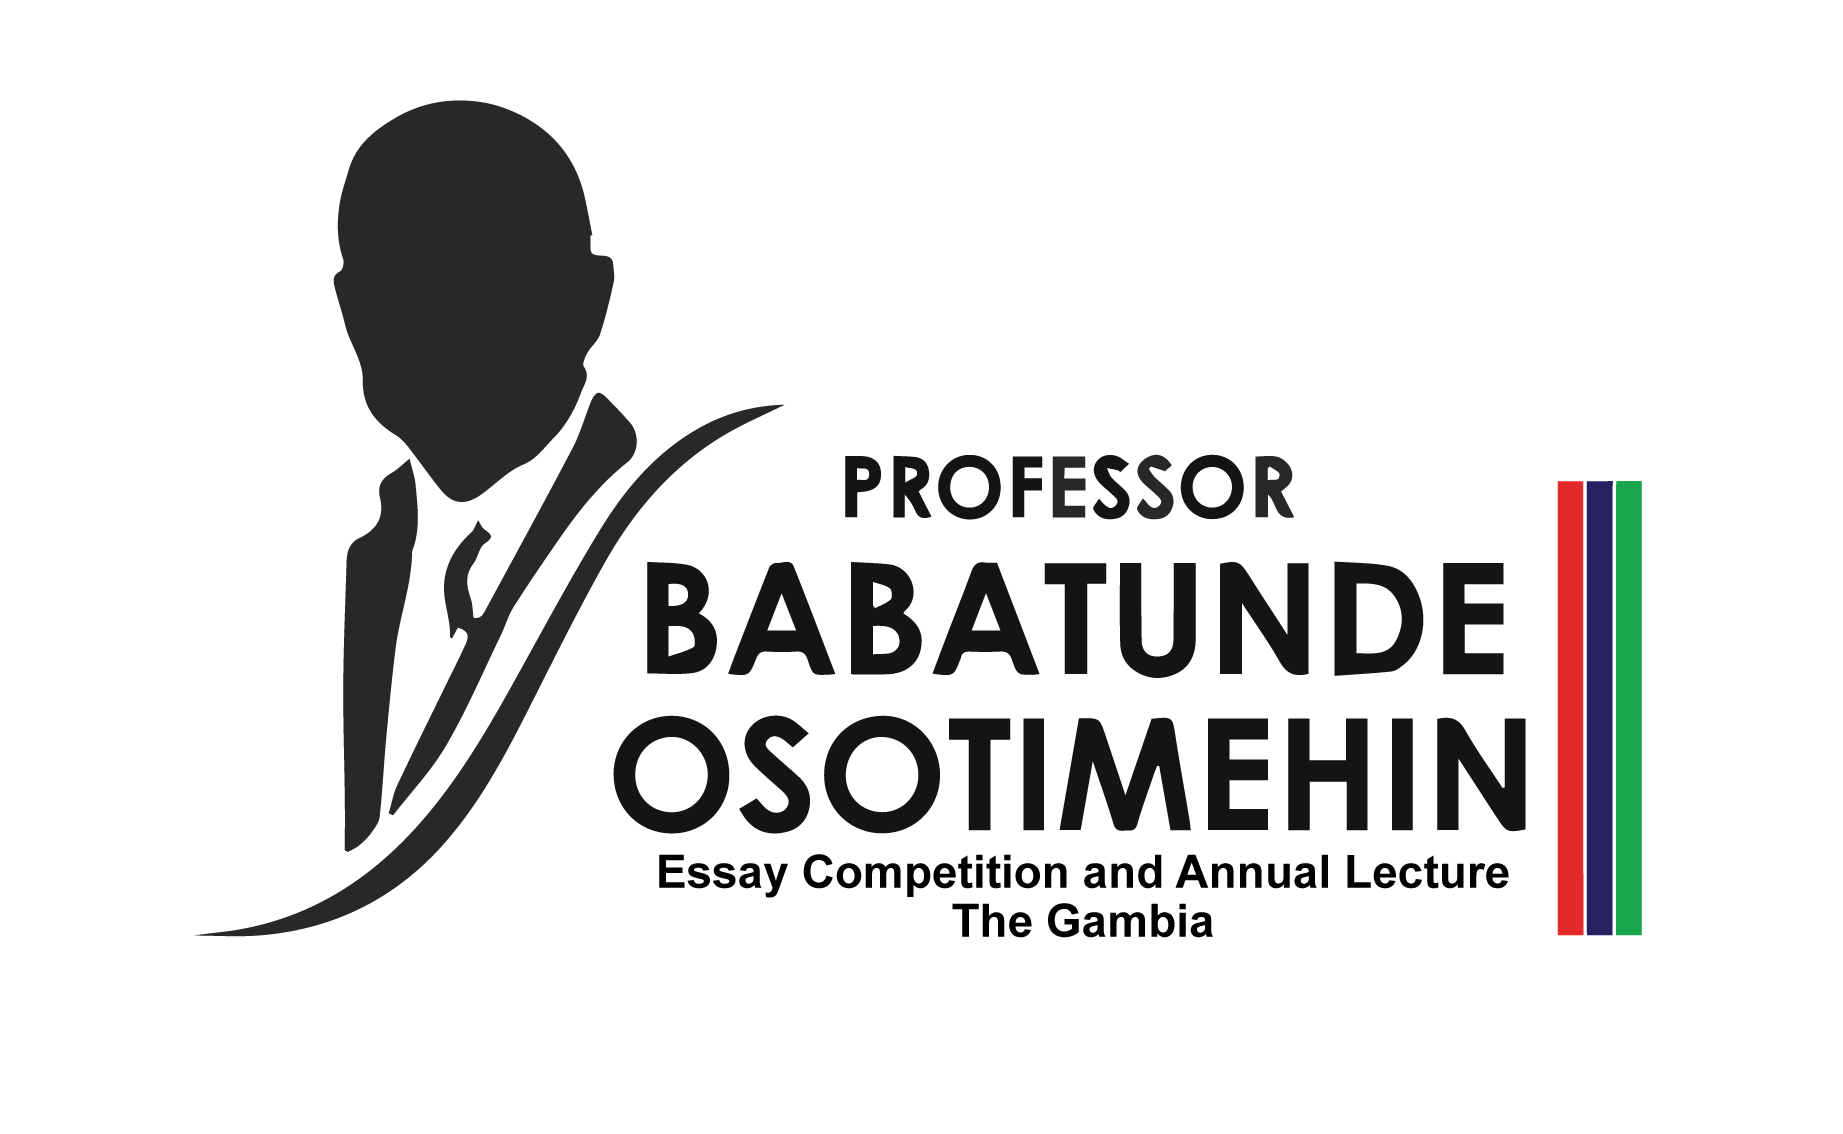 UNFPA The Gambia | The Professor Babatunde Osotimehin Essay Competition and  Annual Lecture - The Gambia